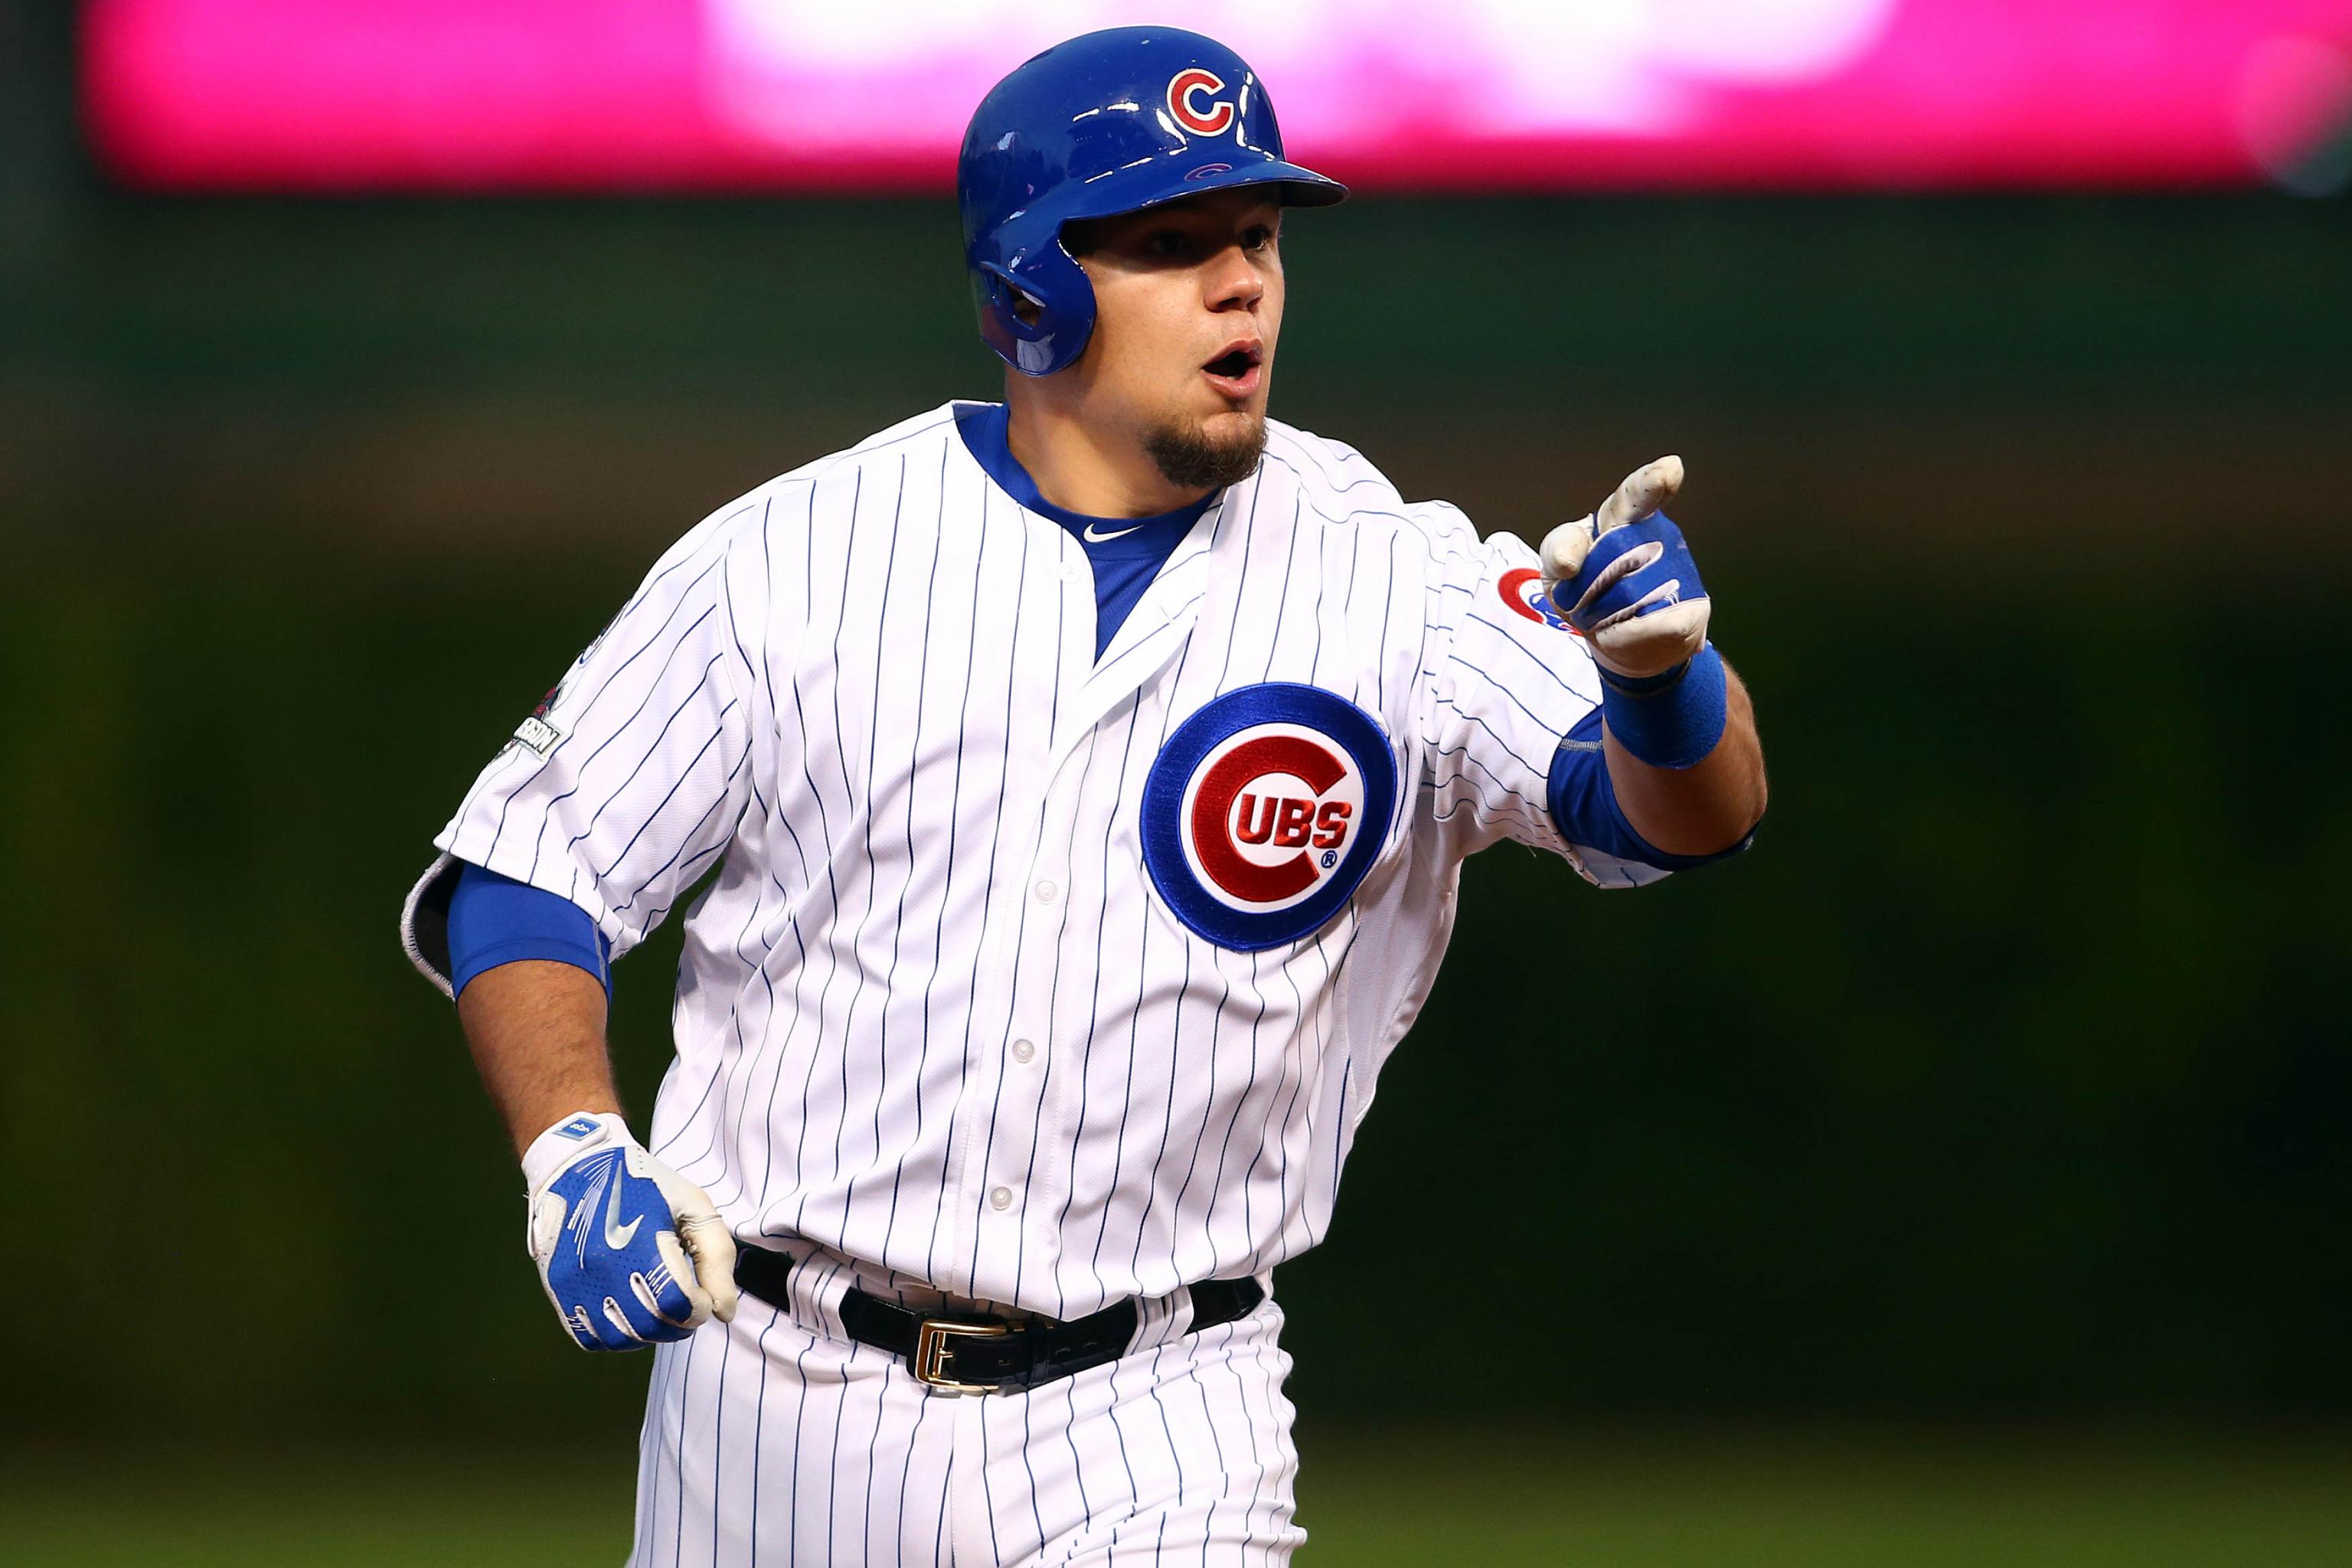 Chicago Cubs' Twitter Page Embarrasses Fan Who Asks for Kyle